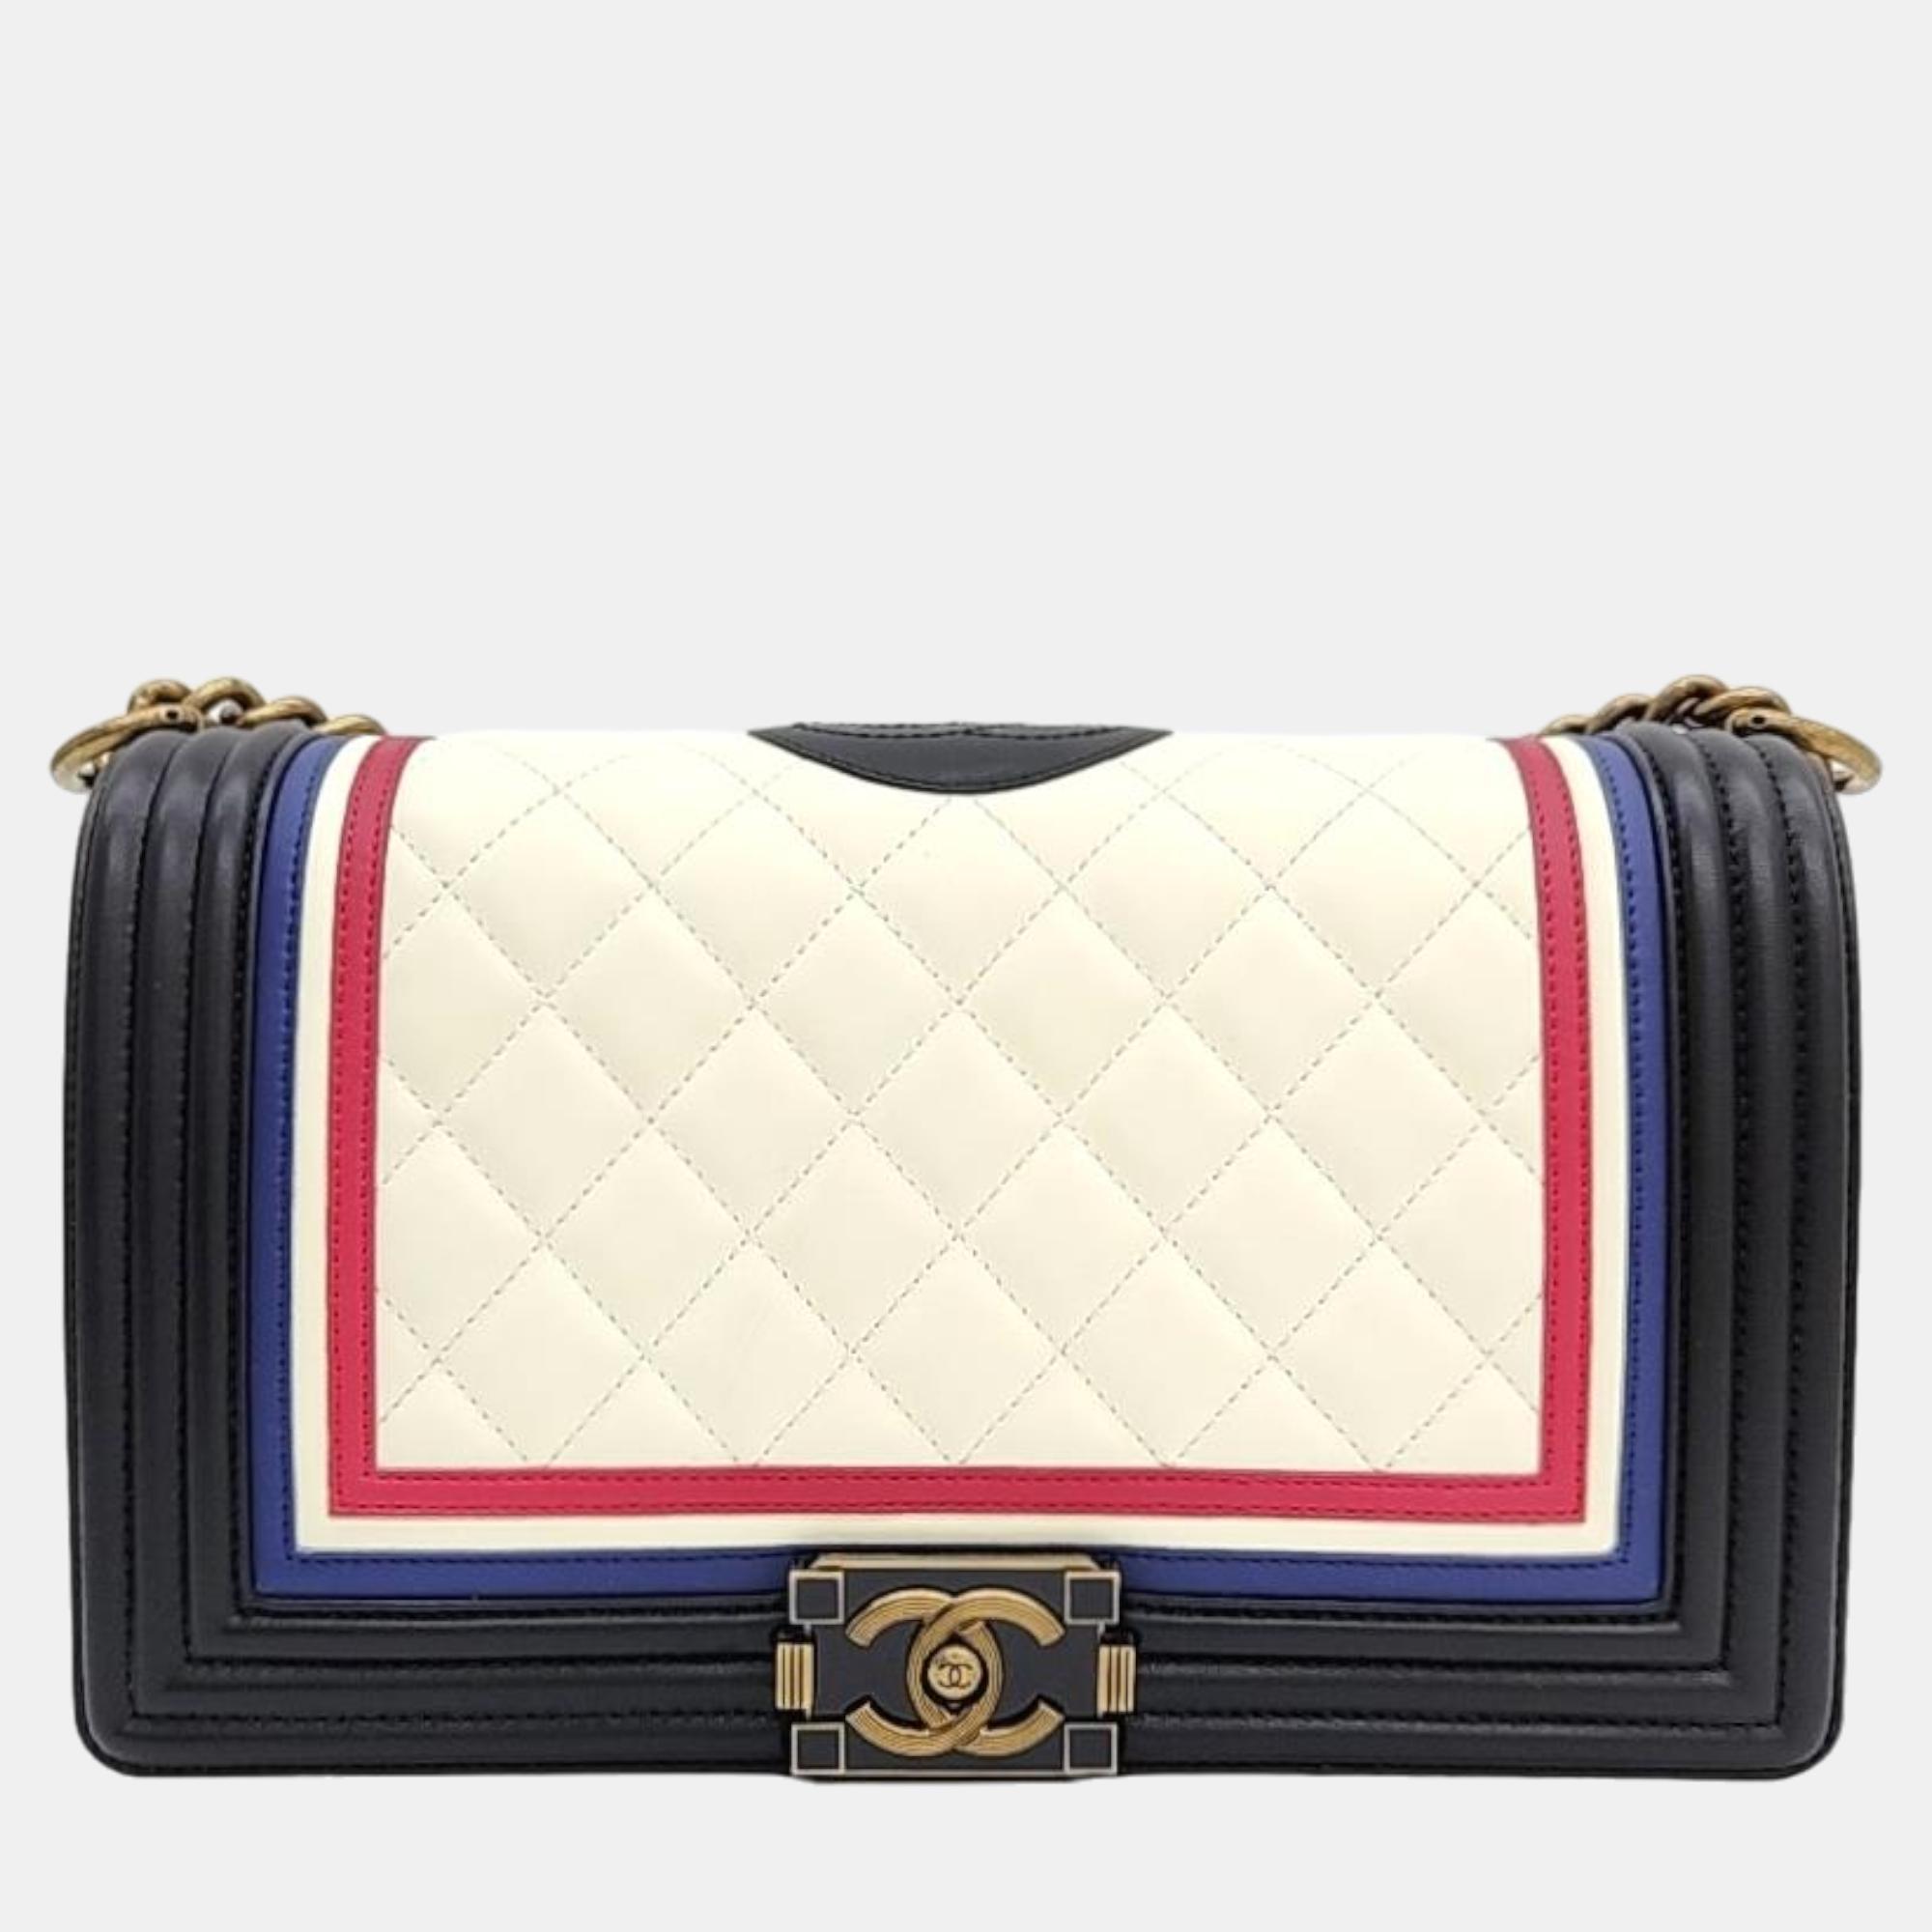 Chanel multicolour quilted lambskin leather east/west crest boy bag